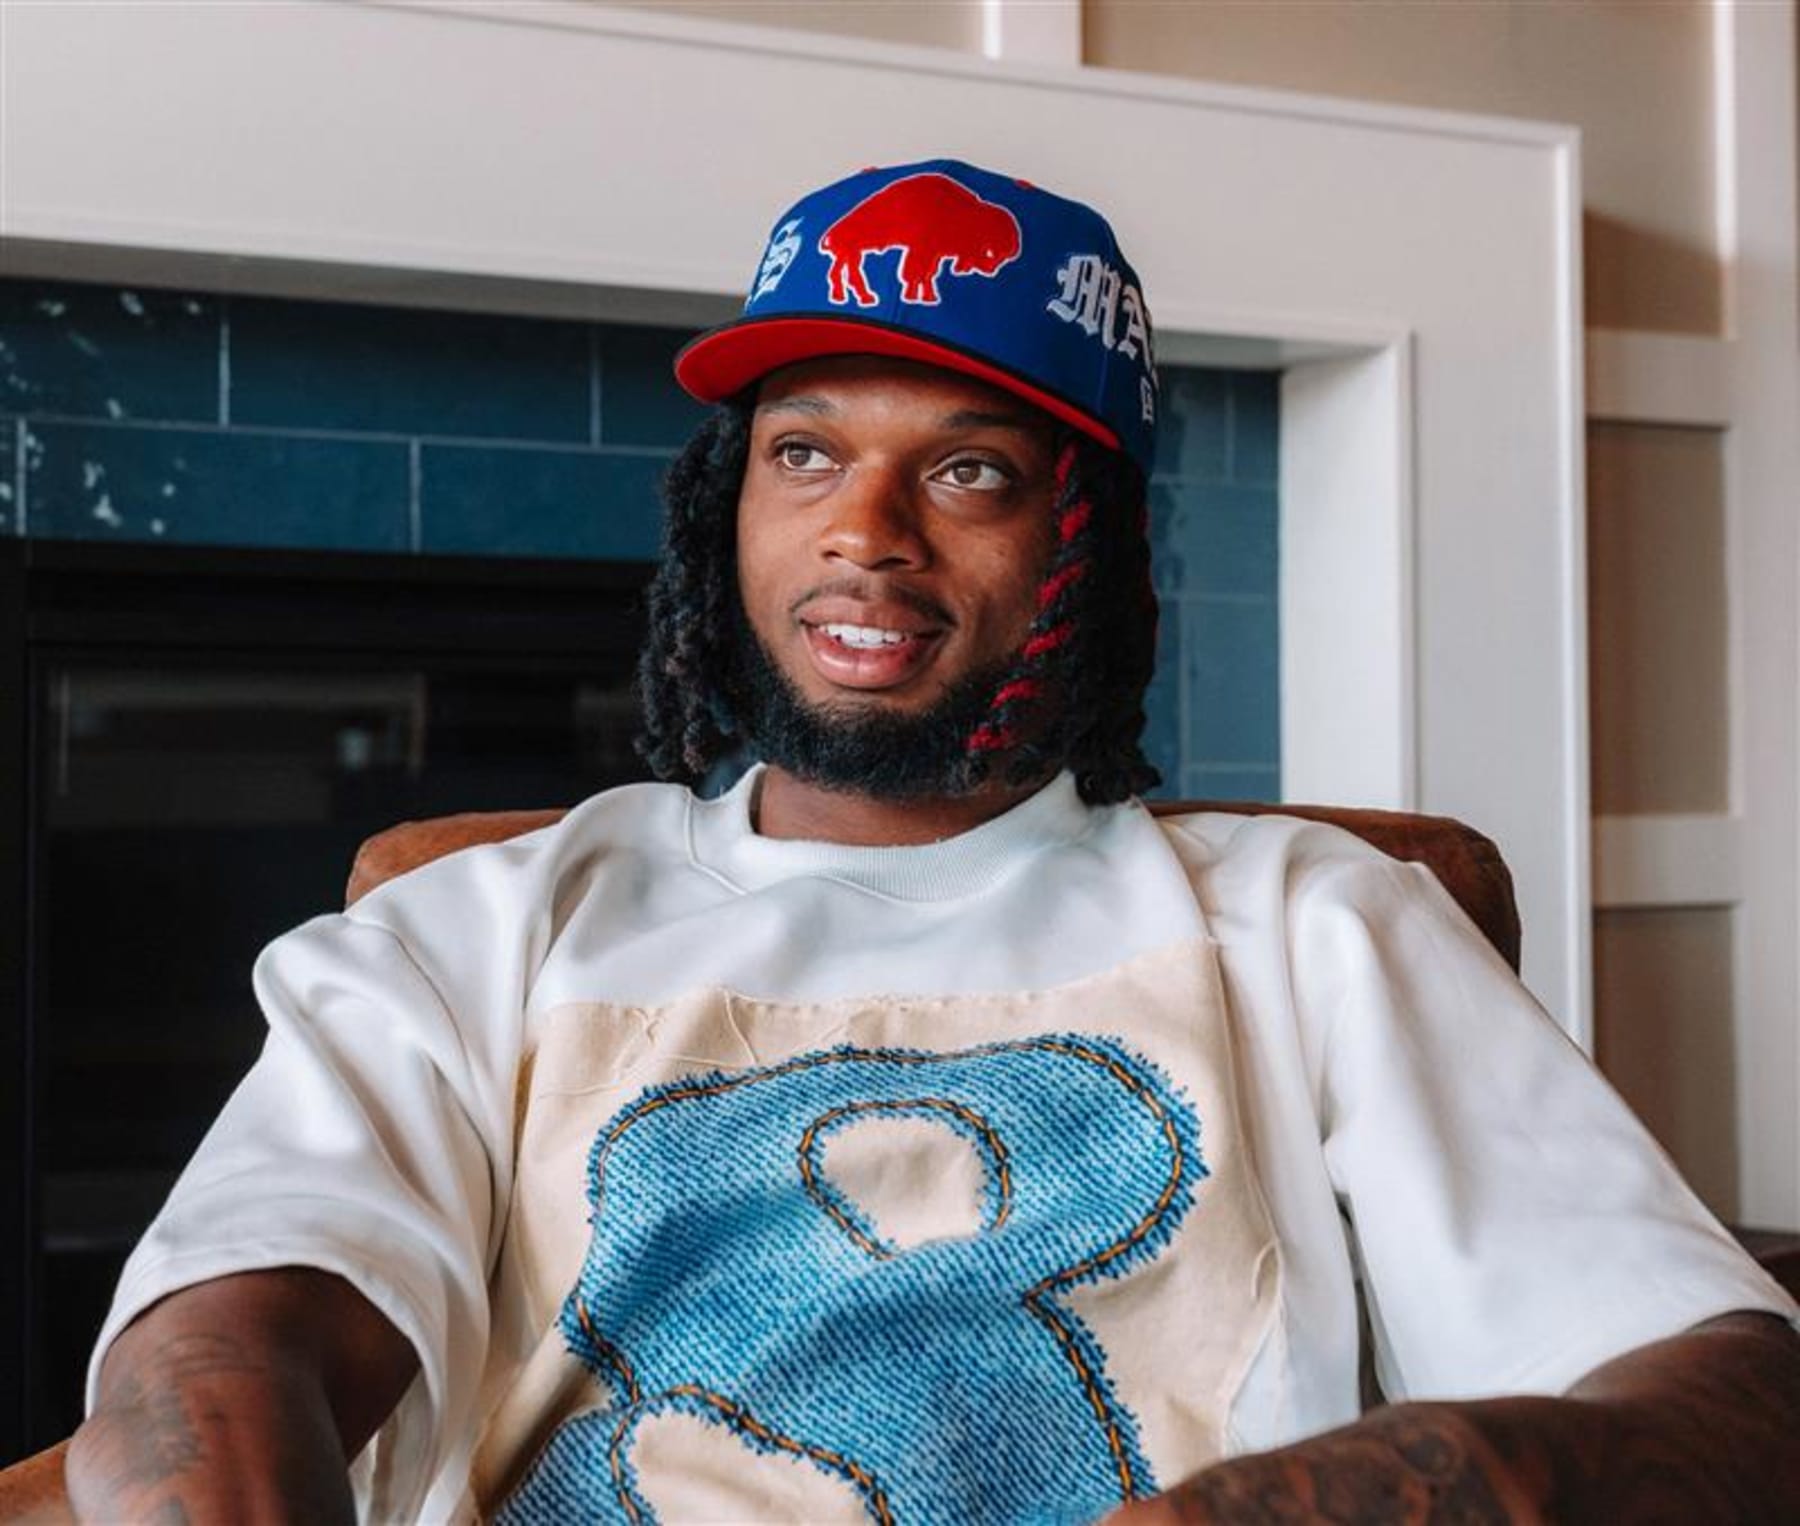 Damar Hamlin, Lids HD Launch 'Bills Mafia' Collection; Money to be Donated  to Charity, News, Scores, Highlights, Stats, and Rumors